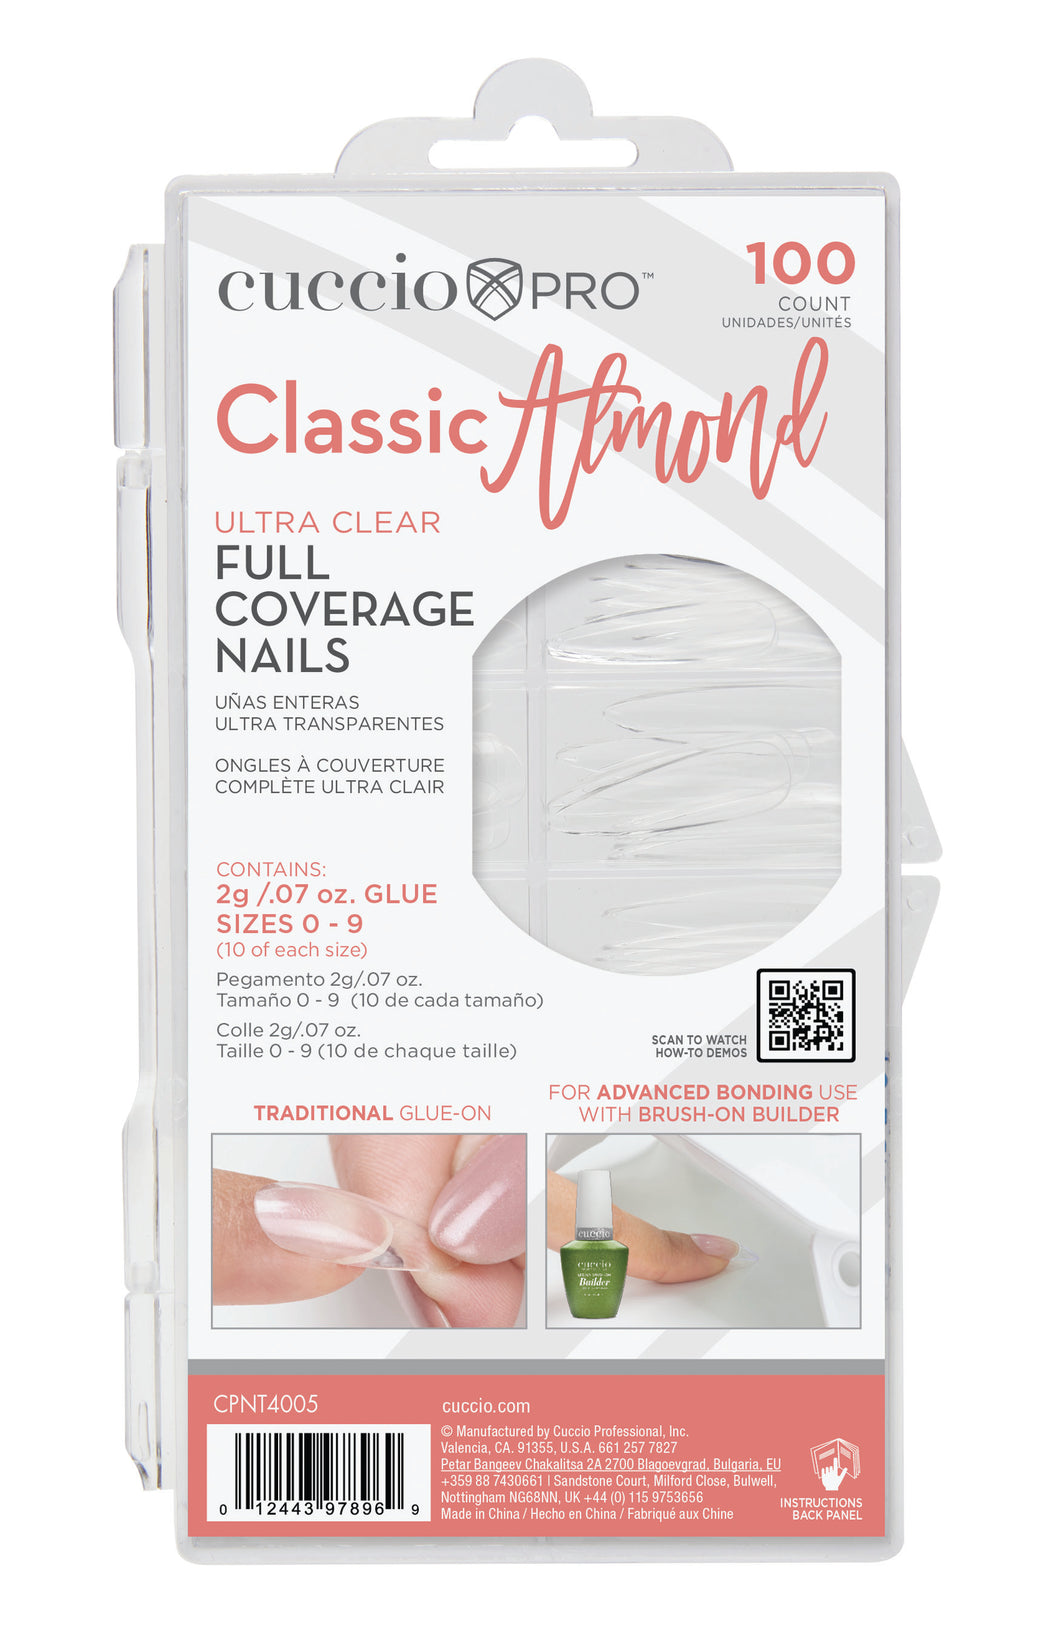 Full Coverage Nail Tips - Classic Almond - 100 Count